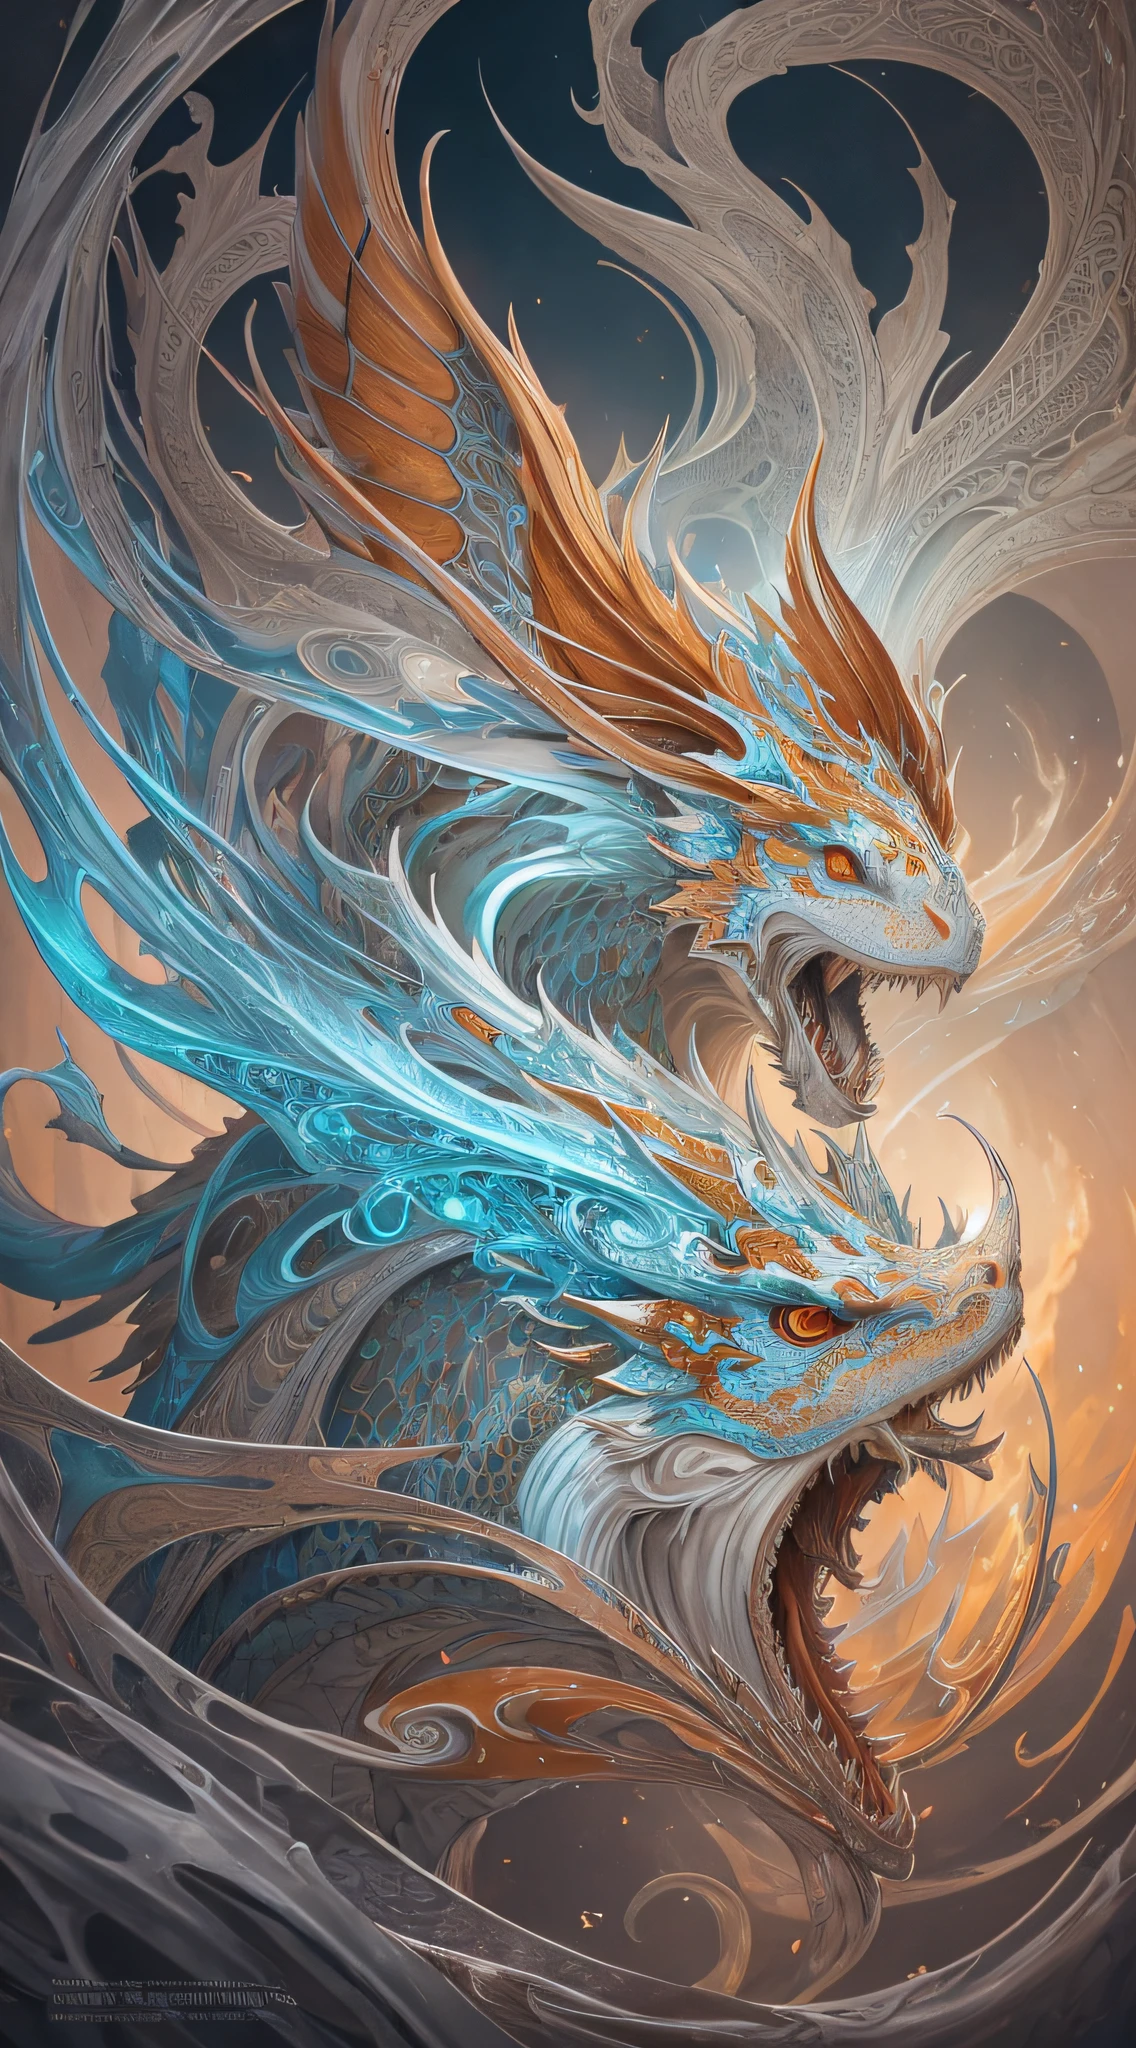 A digital painting of a dragon with a blue and orange tail - SeaArt AI